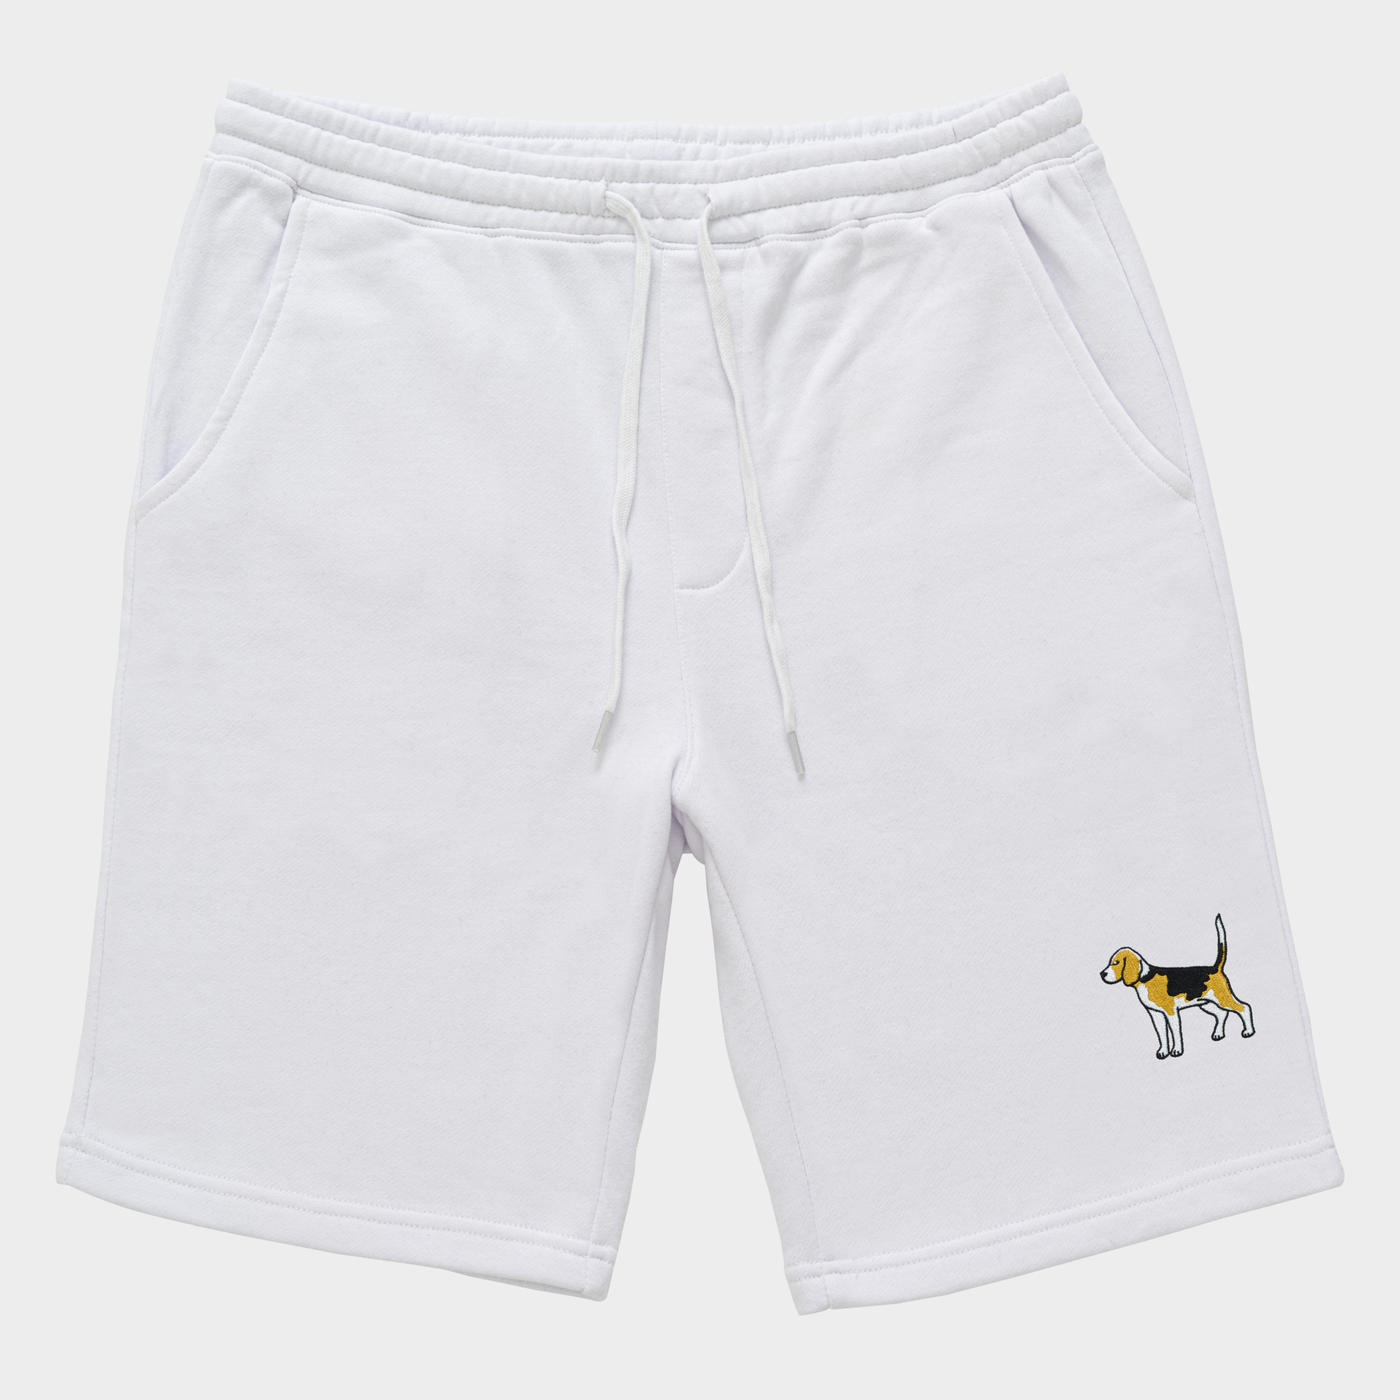 Bobby's Planet Men's Embroidered Beagle Shorts from Paws Dog Cat Animals Collection in White Color#color_white